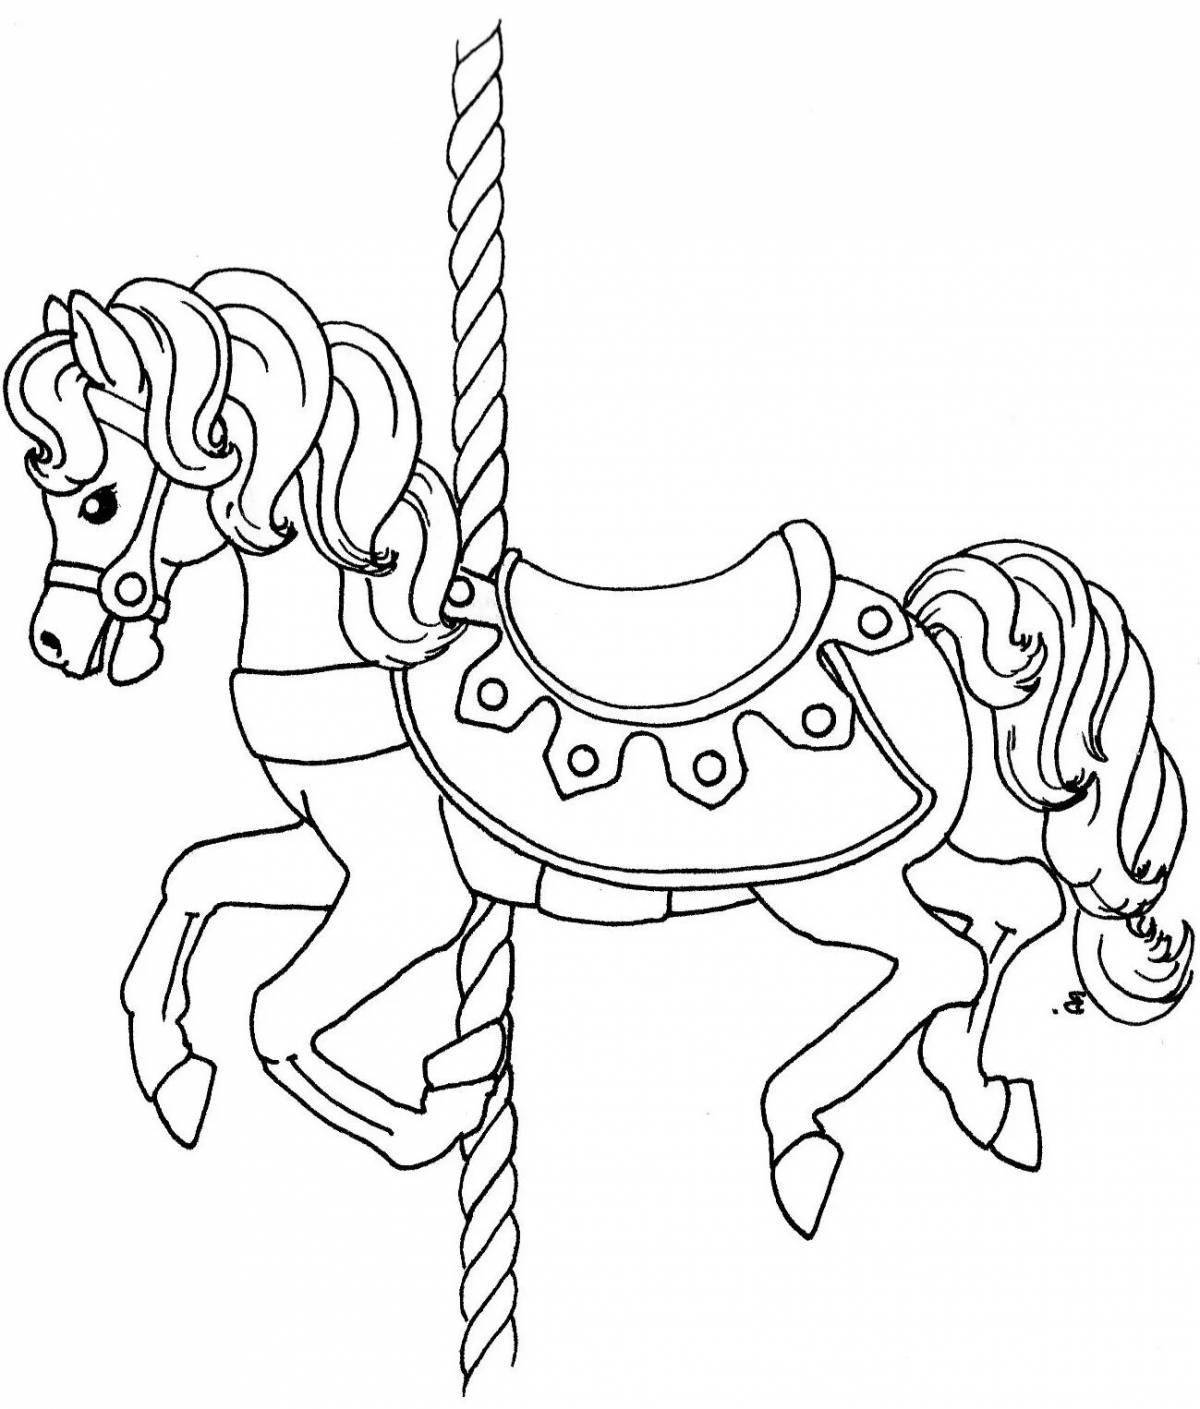 Dazzling carousel coloring for minors